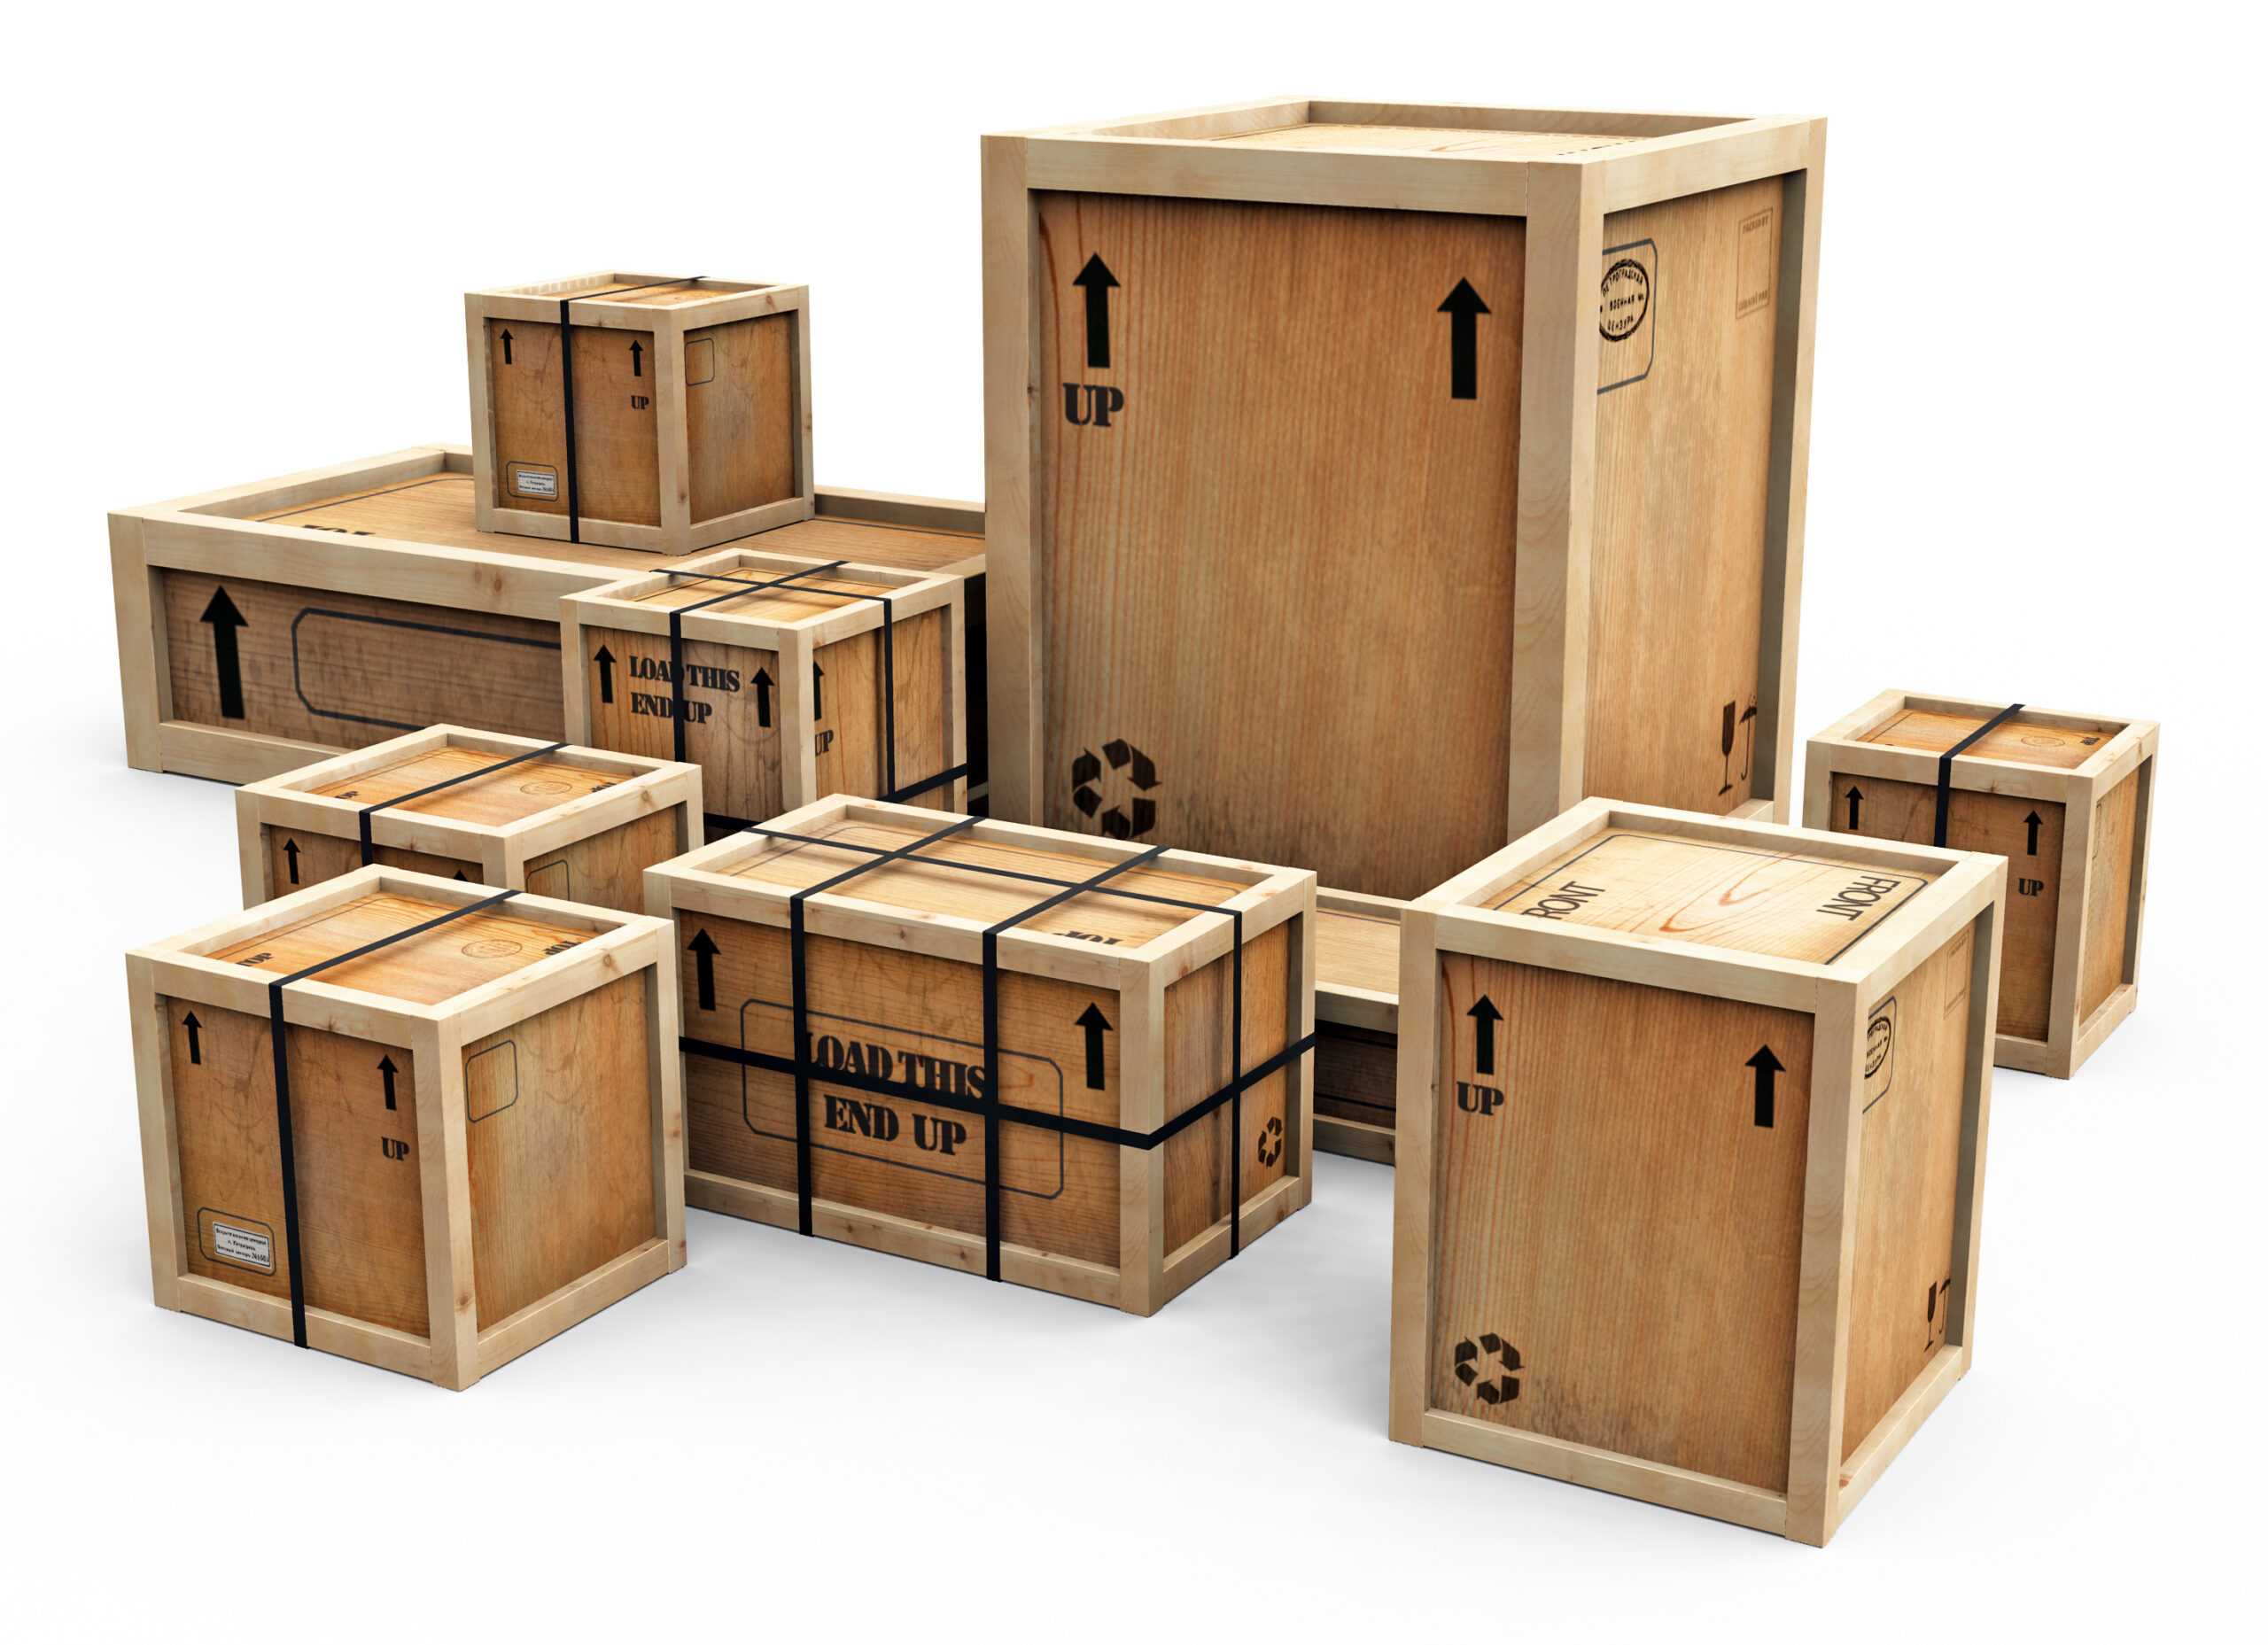 Wood shipping crates in different sizes